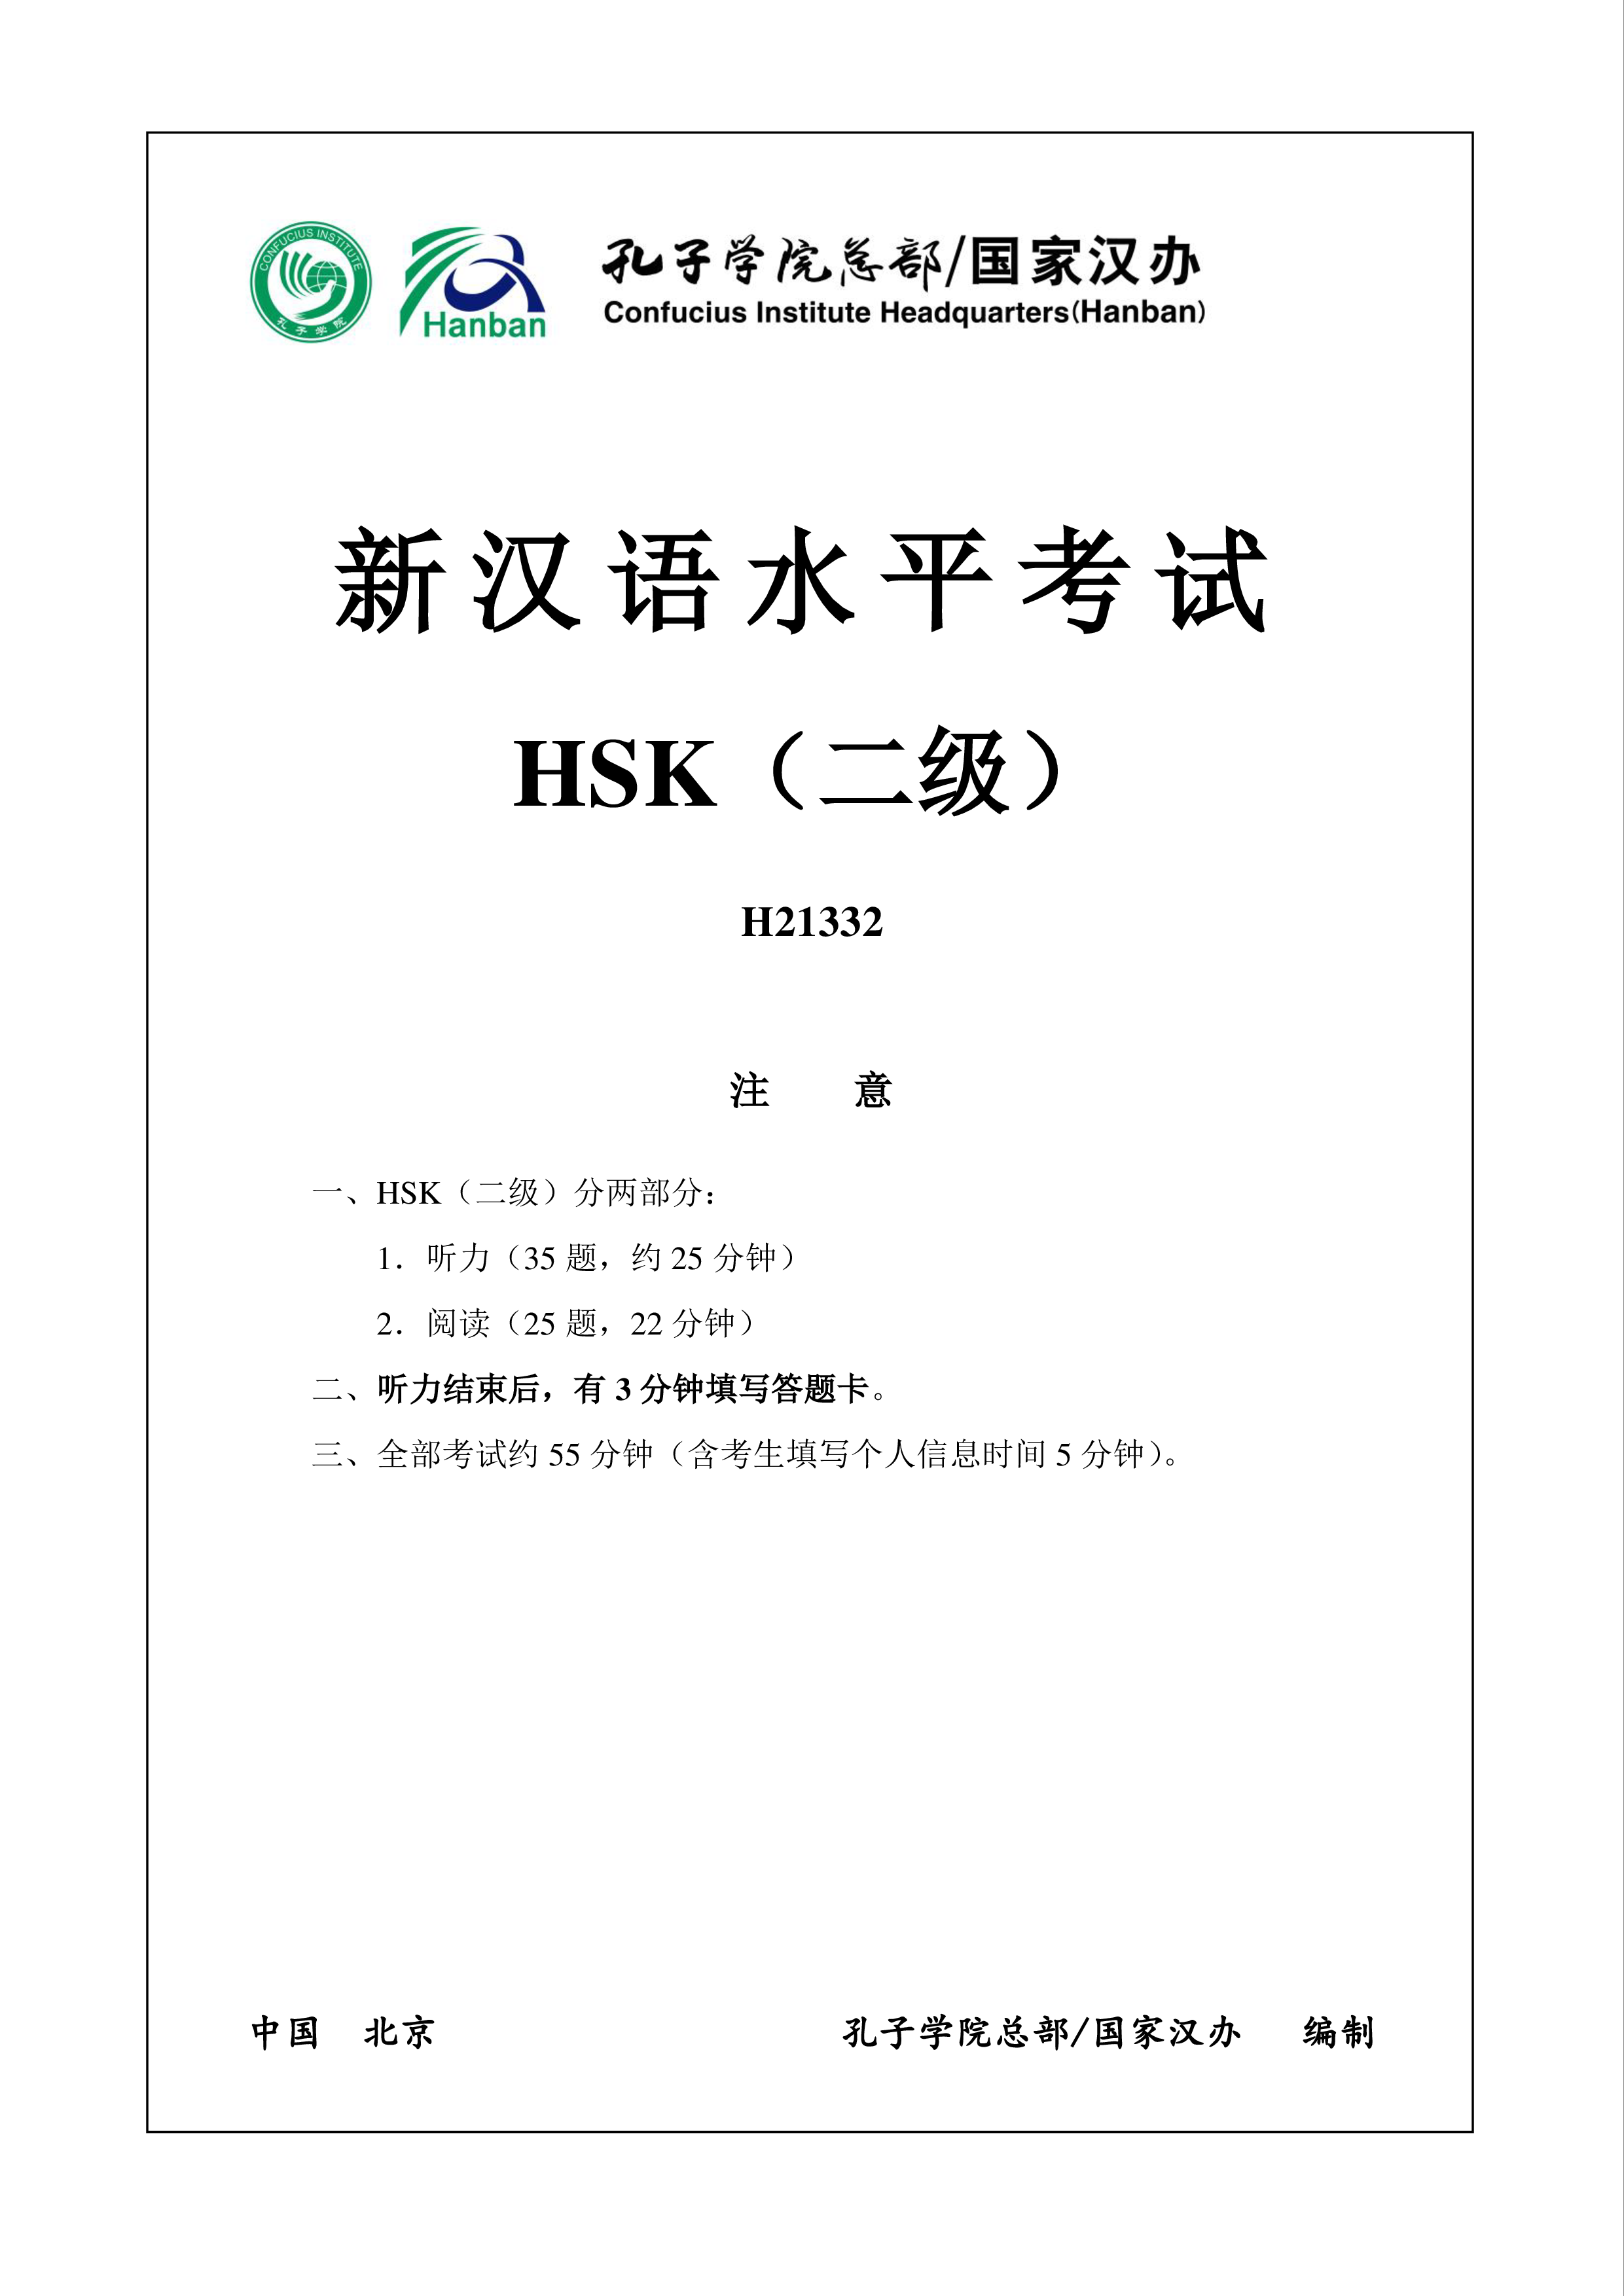 hsk2 chinese exam including answers # hsk2 h21332 voorbeeld afbeelding 